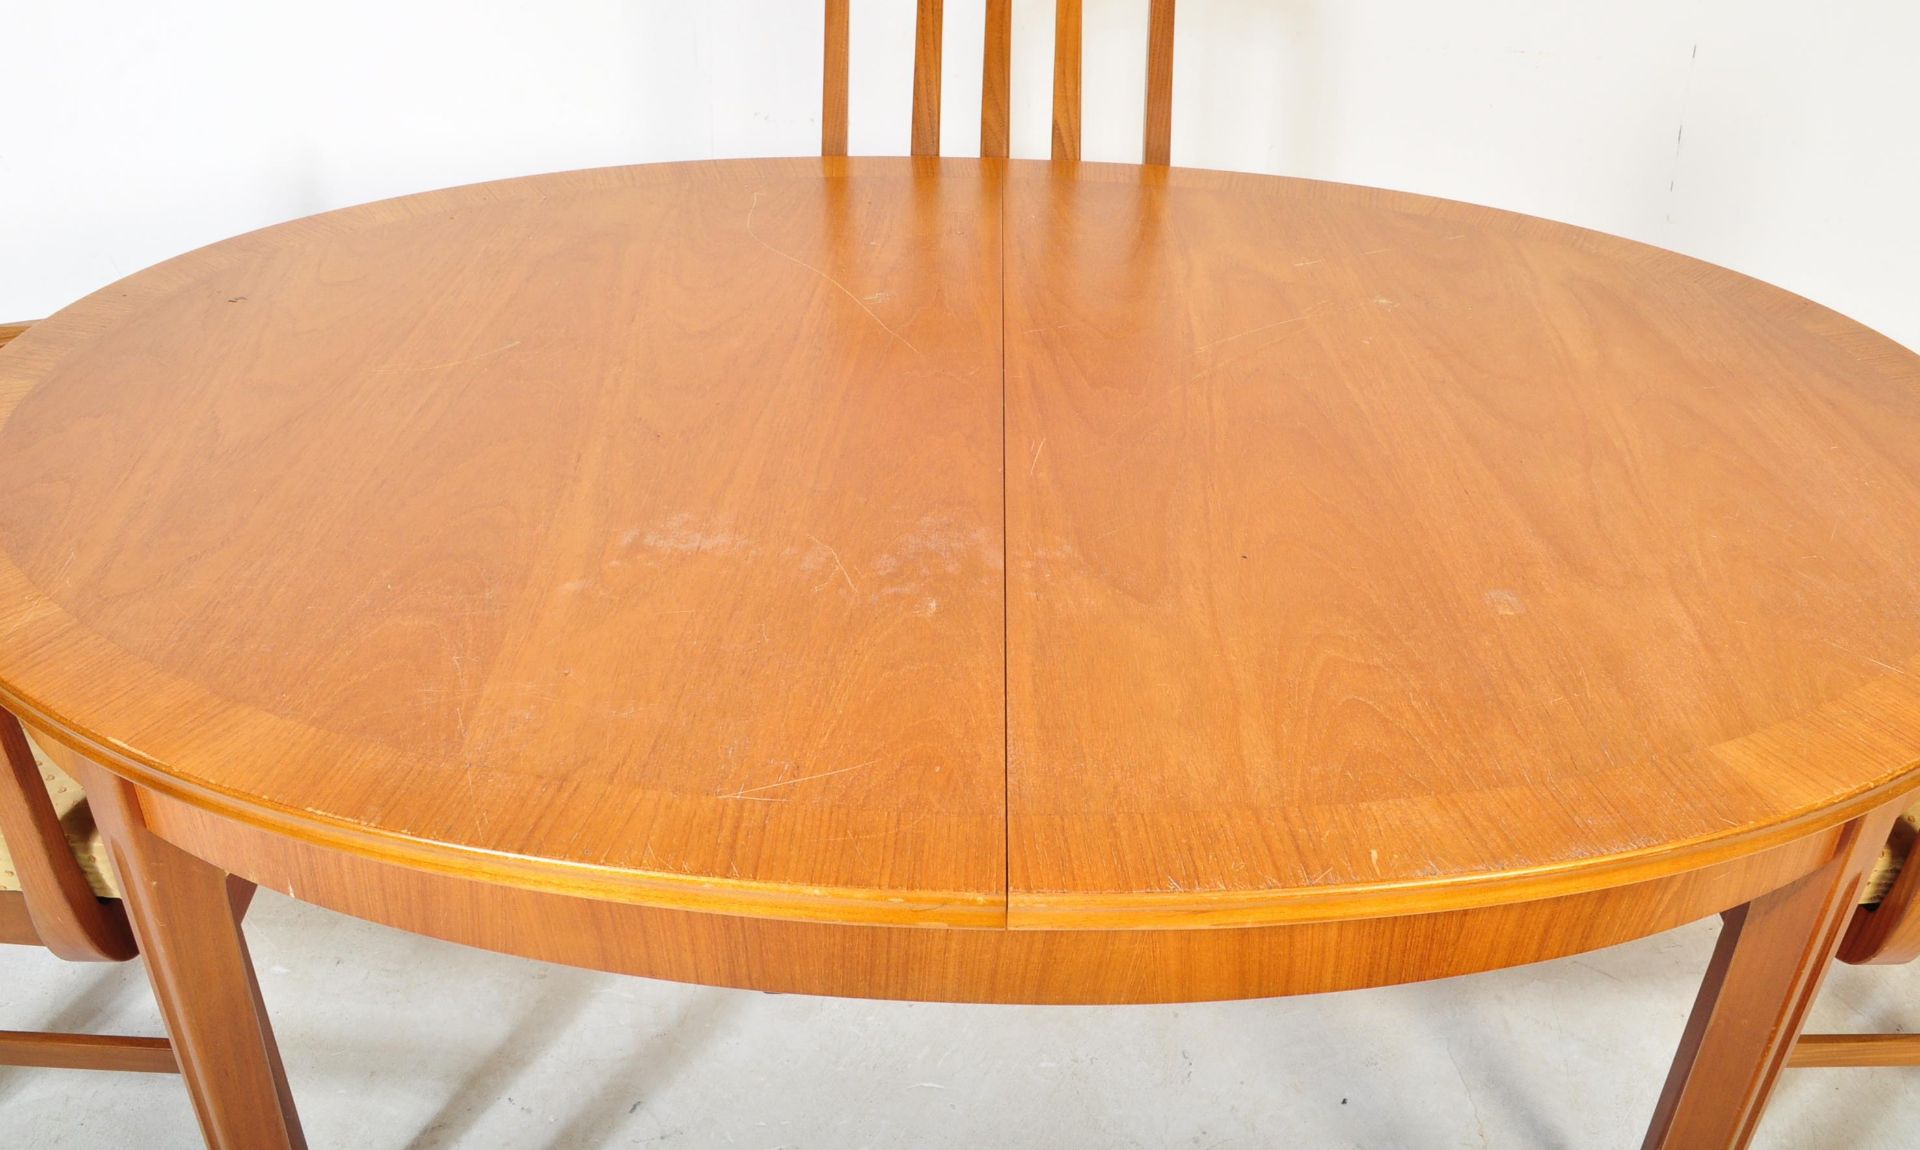 WILLIAM LAWRENCE - MID 20TH C TEAK DINING TABLE & CHAIRS - Image 2 of 6